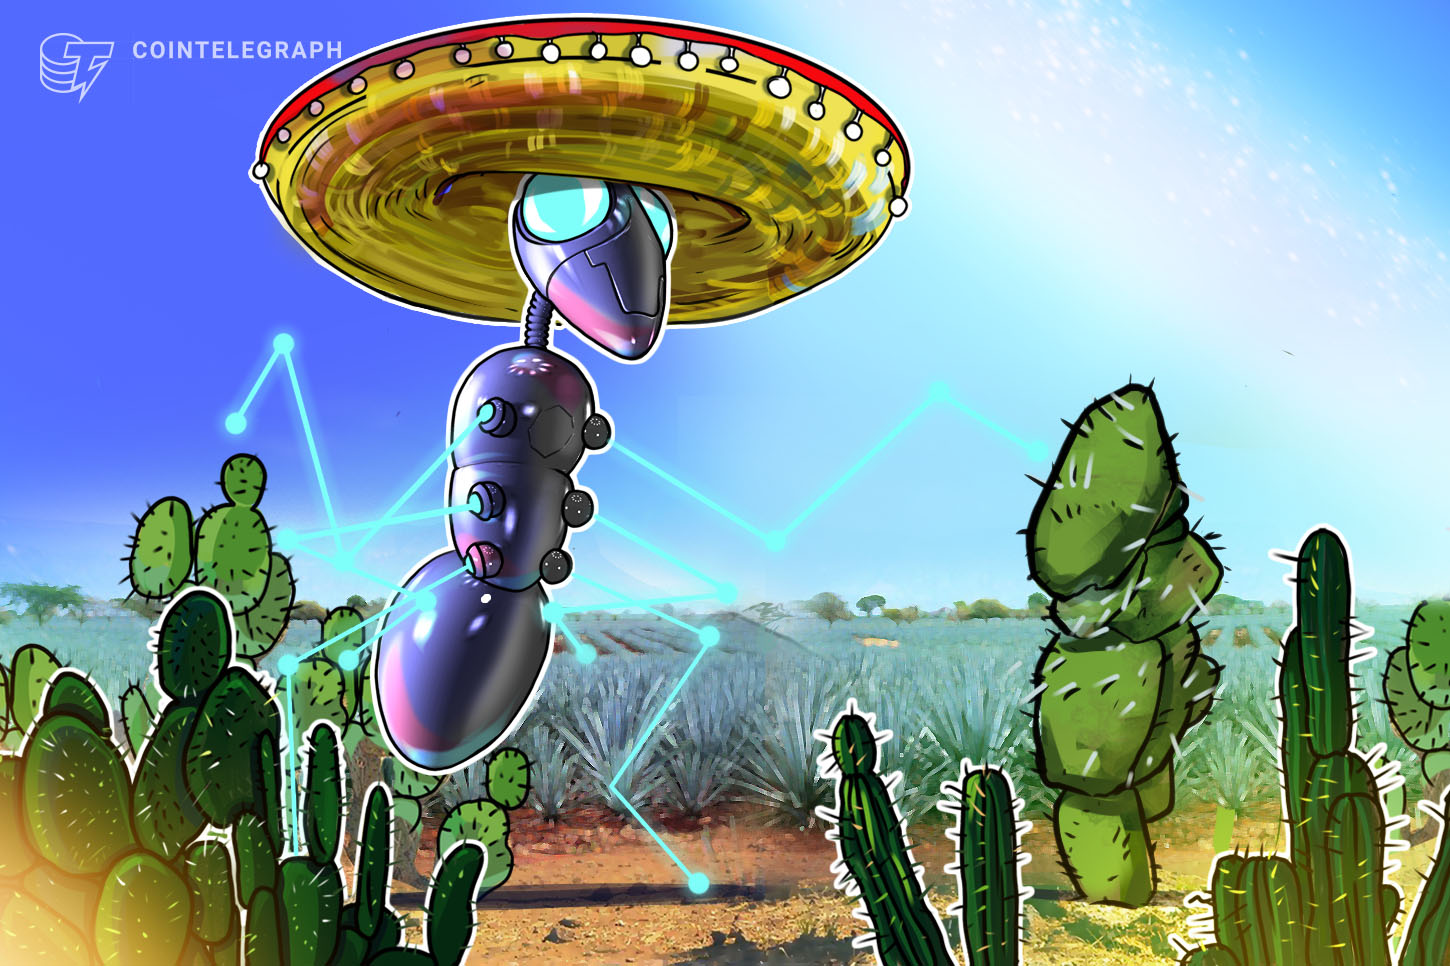 An encryption examine revealed a shocking truth about blockchain adoption in Mexico